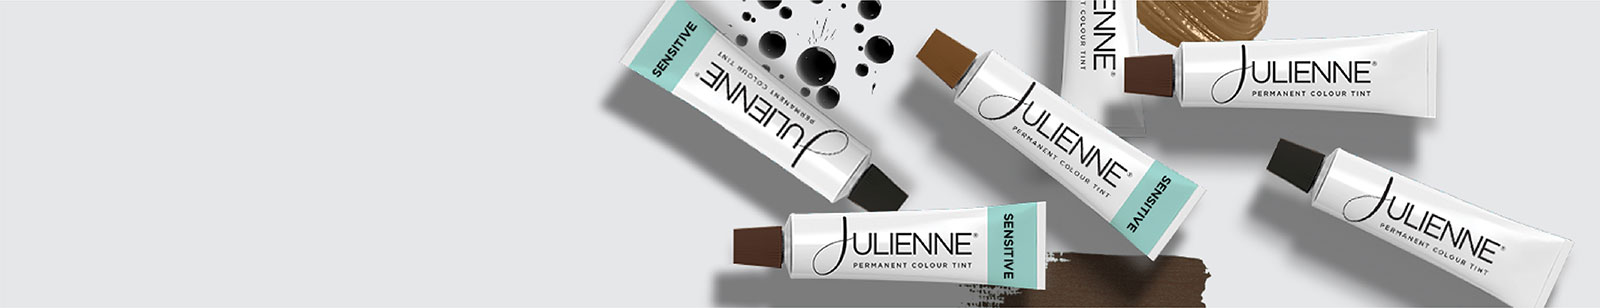 Julienne Products